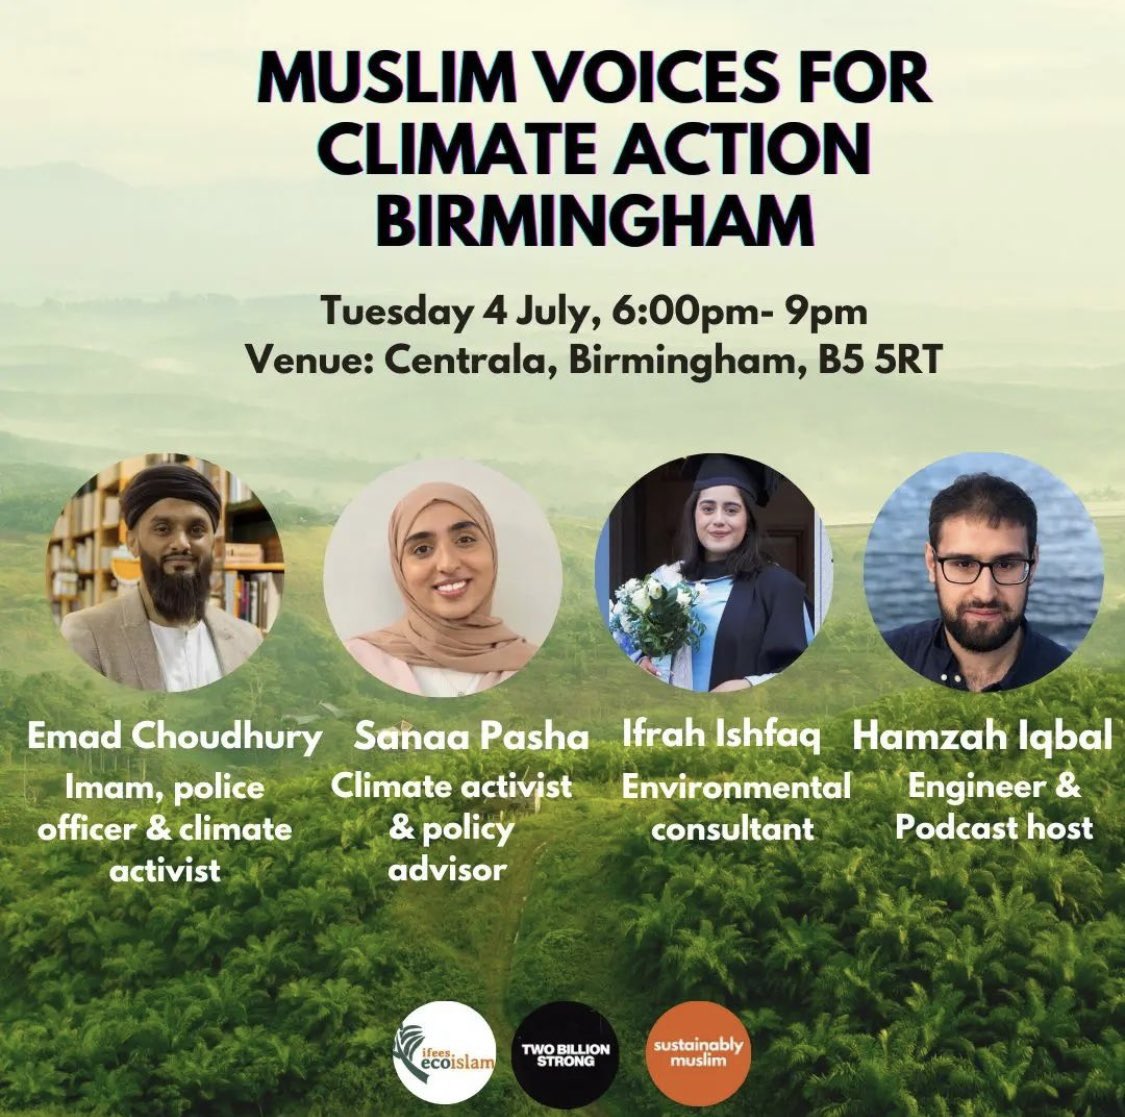 Muslim Voices for Climate Action - An event in Birmingham not to miss out on. Organised by amazing young people at #TwoBillionStrong, @sustainablymus and @EcoIslam_IFEES. eventbrite.com/e/muslim-voice…